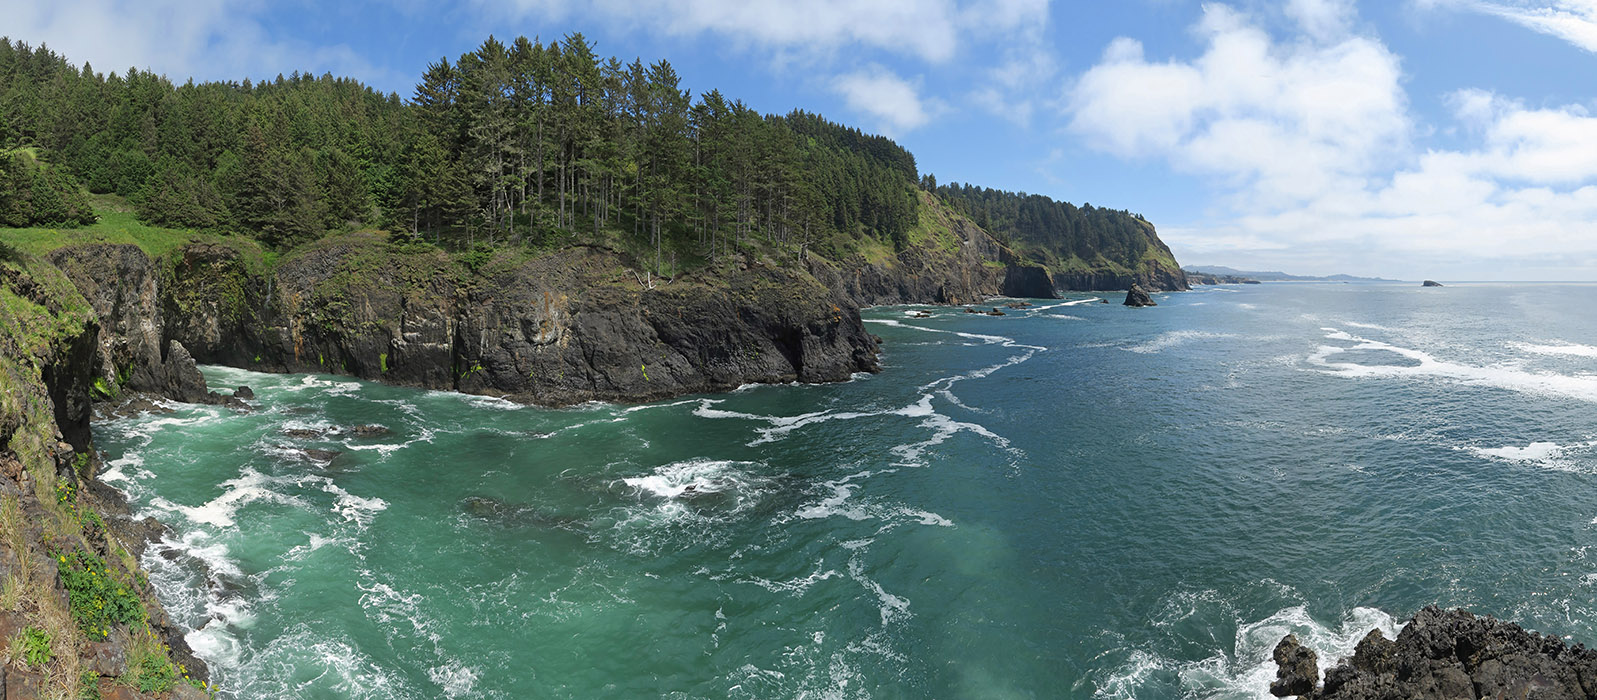 Cape Foulweather panorama [Cape Foulweather, Lincoln County, Oregon]